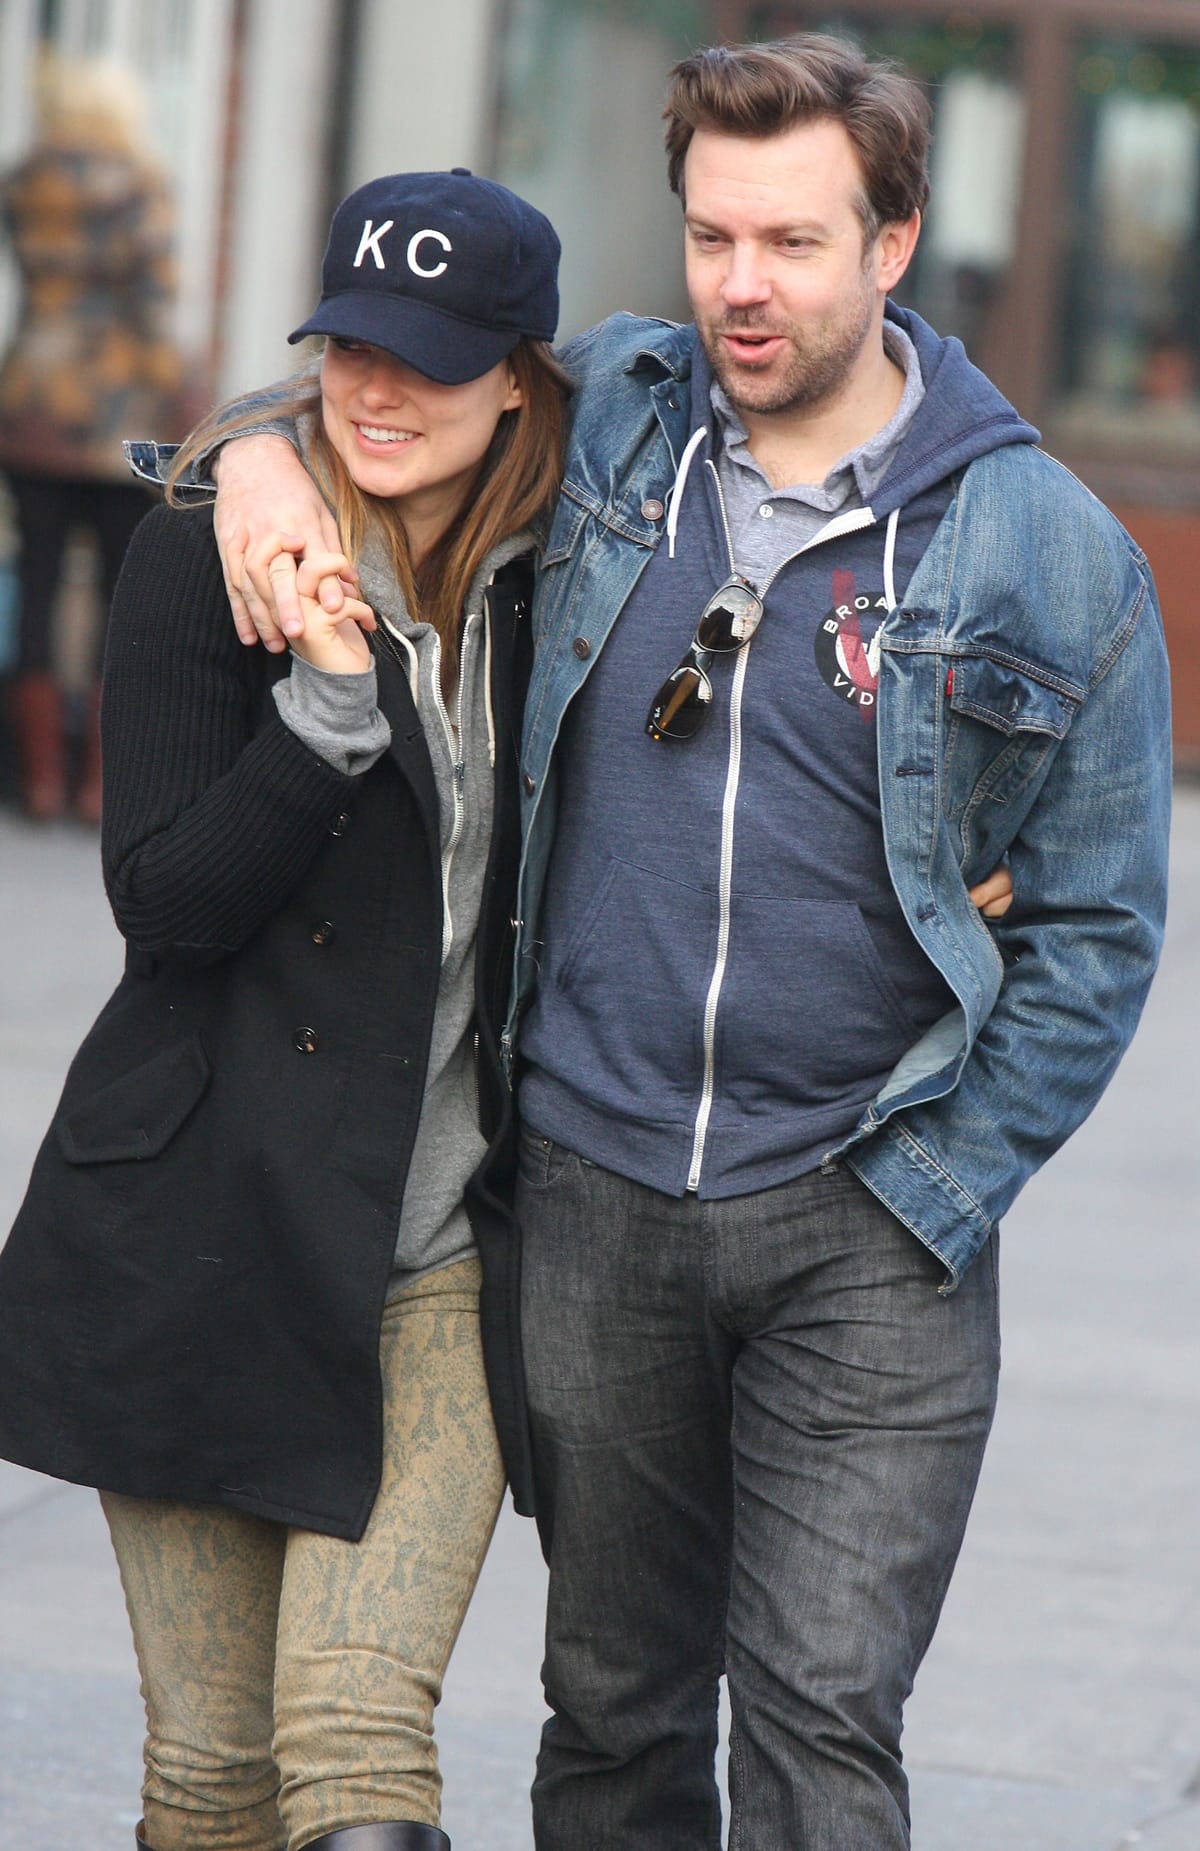 Olivia Wilde and Jason Sudeikis started dating after meeting at a Saturday Night Live finale party in May 2011